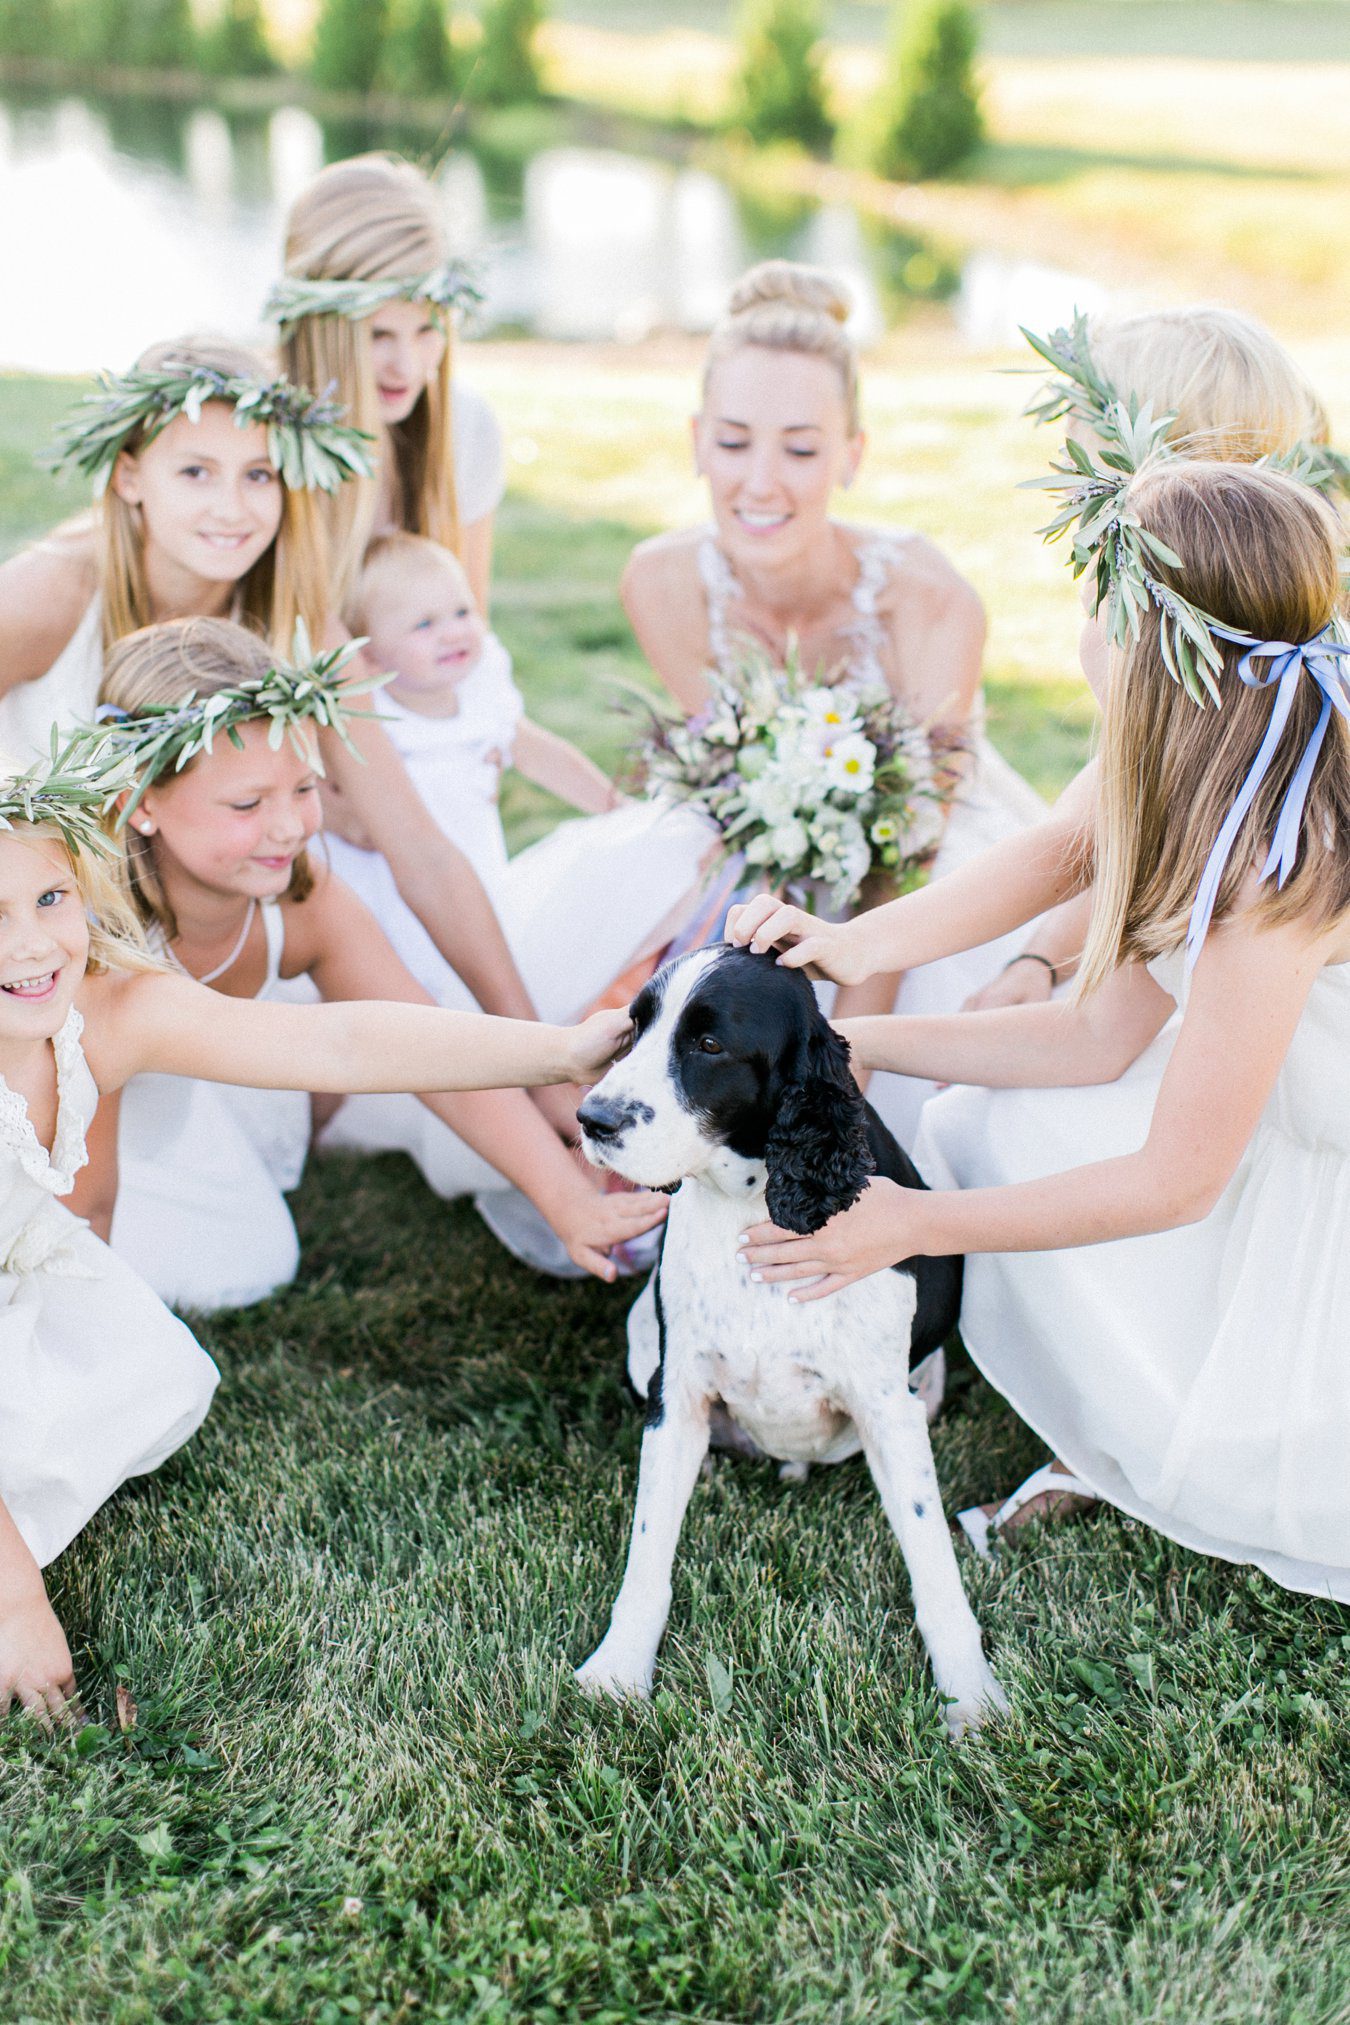 BLOOM Floral Design | Flowergirl crown wreaths | Cory Weber Photography